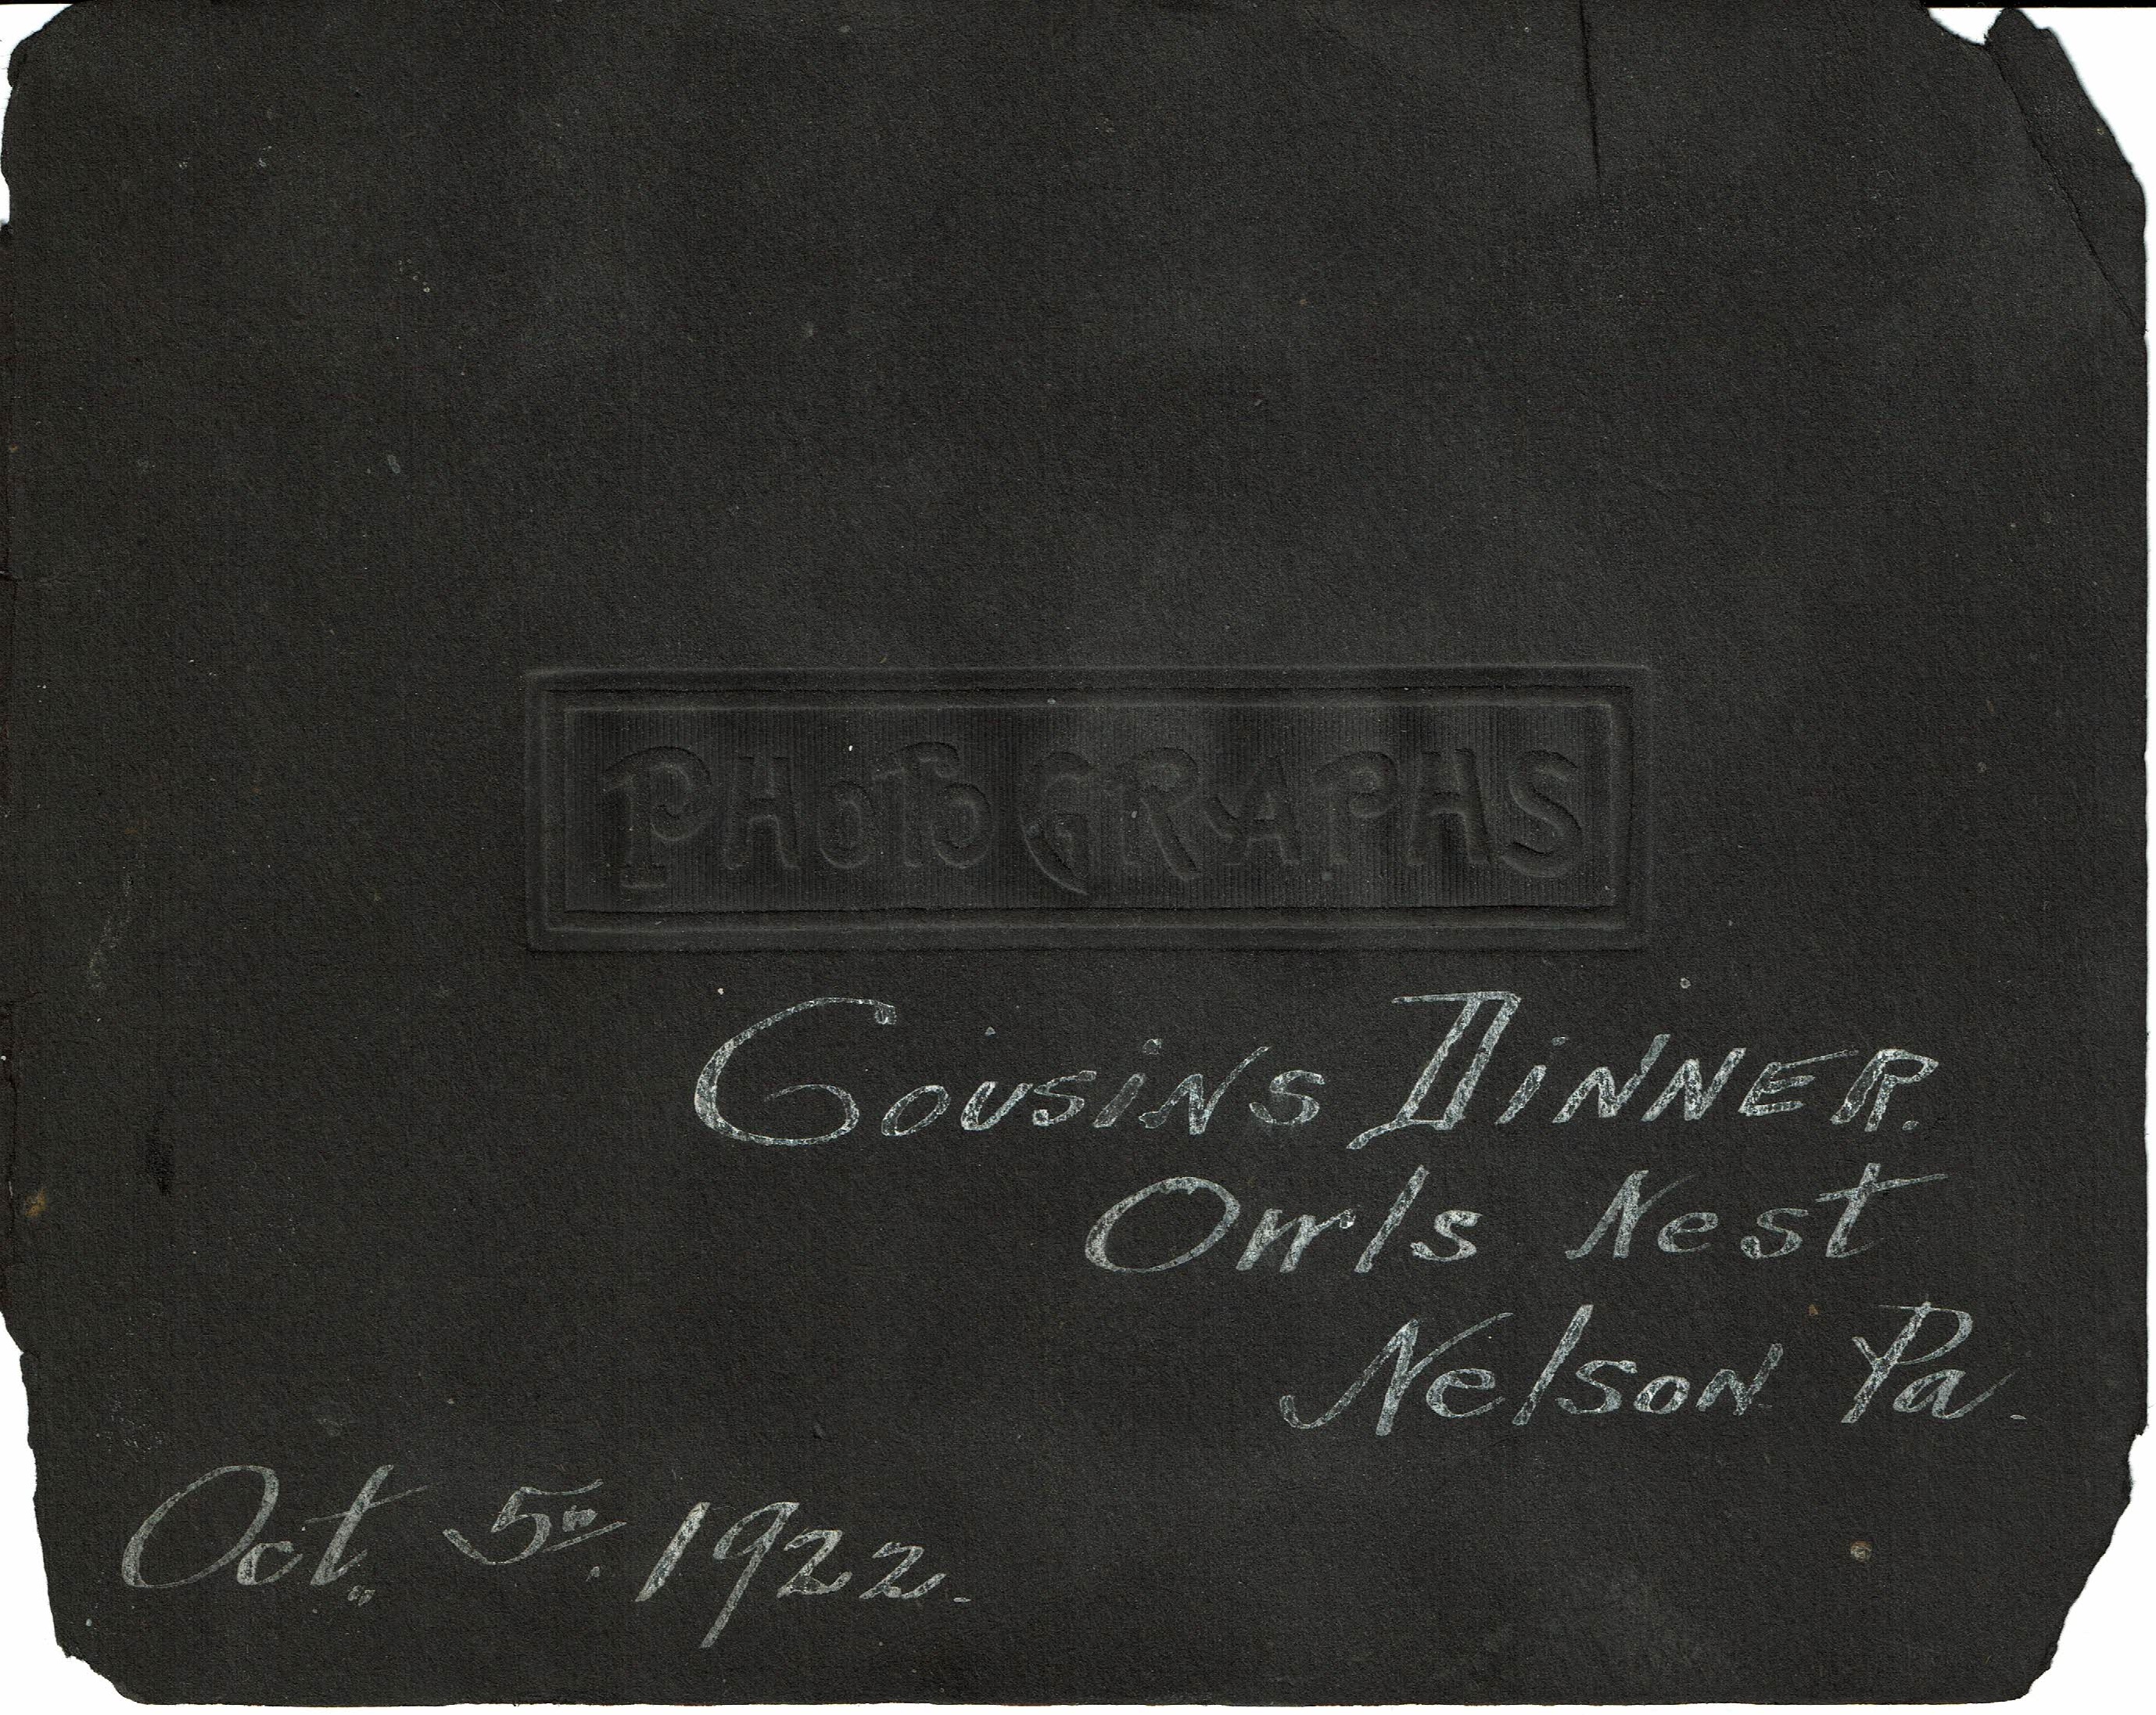 Photo of page one of the cover of the photo album of1922 Campbell Cousins Dinner